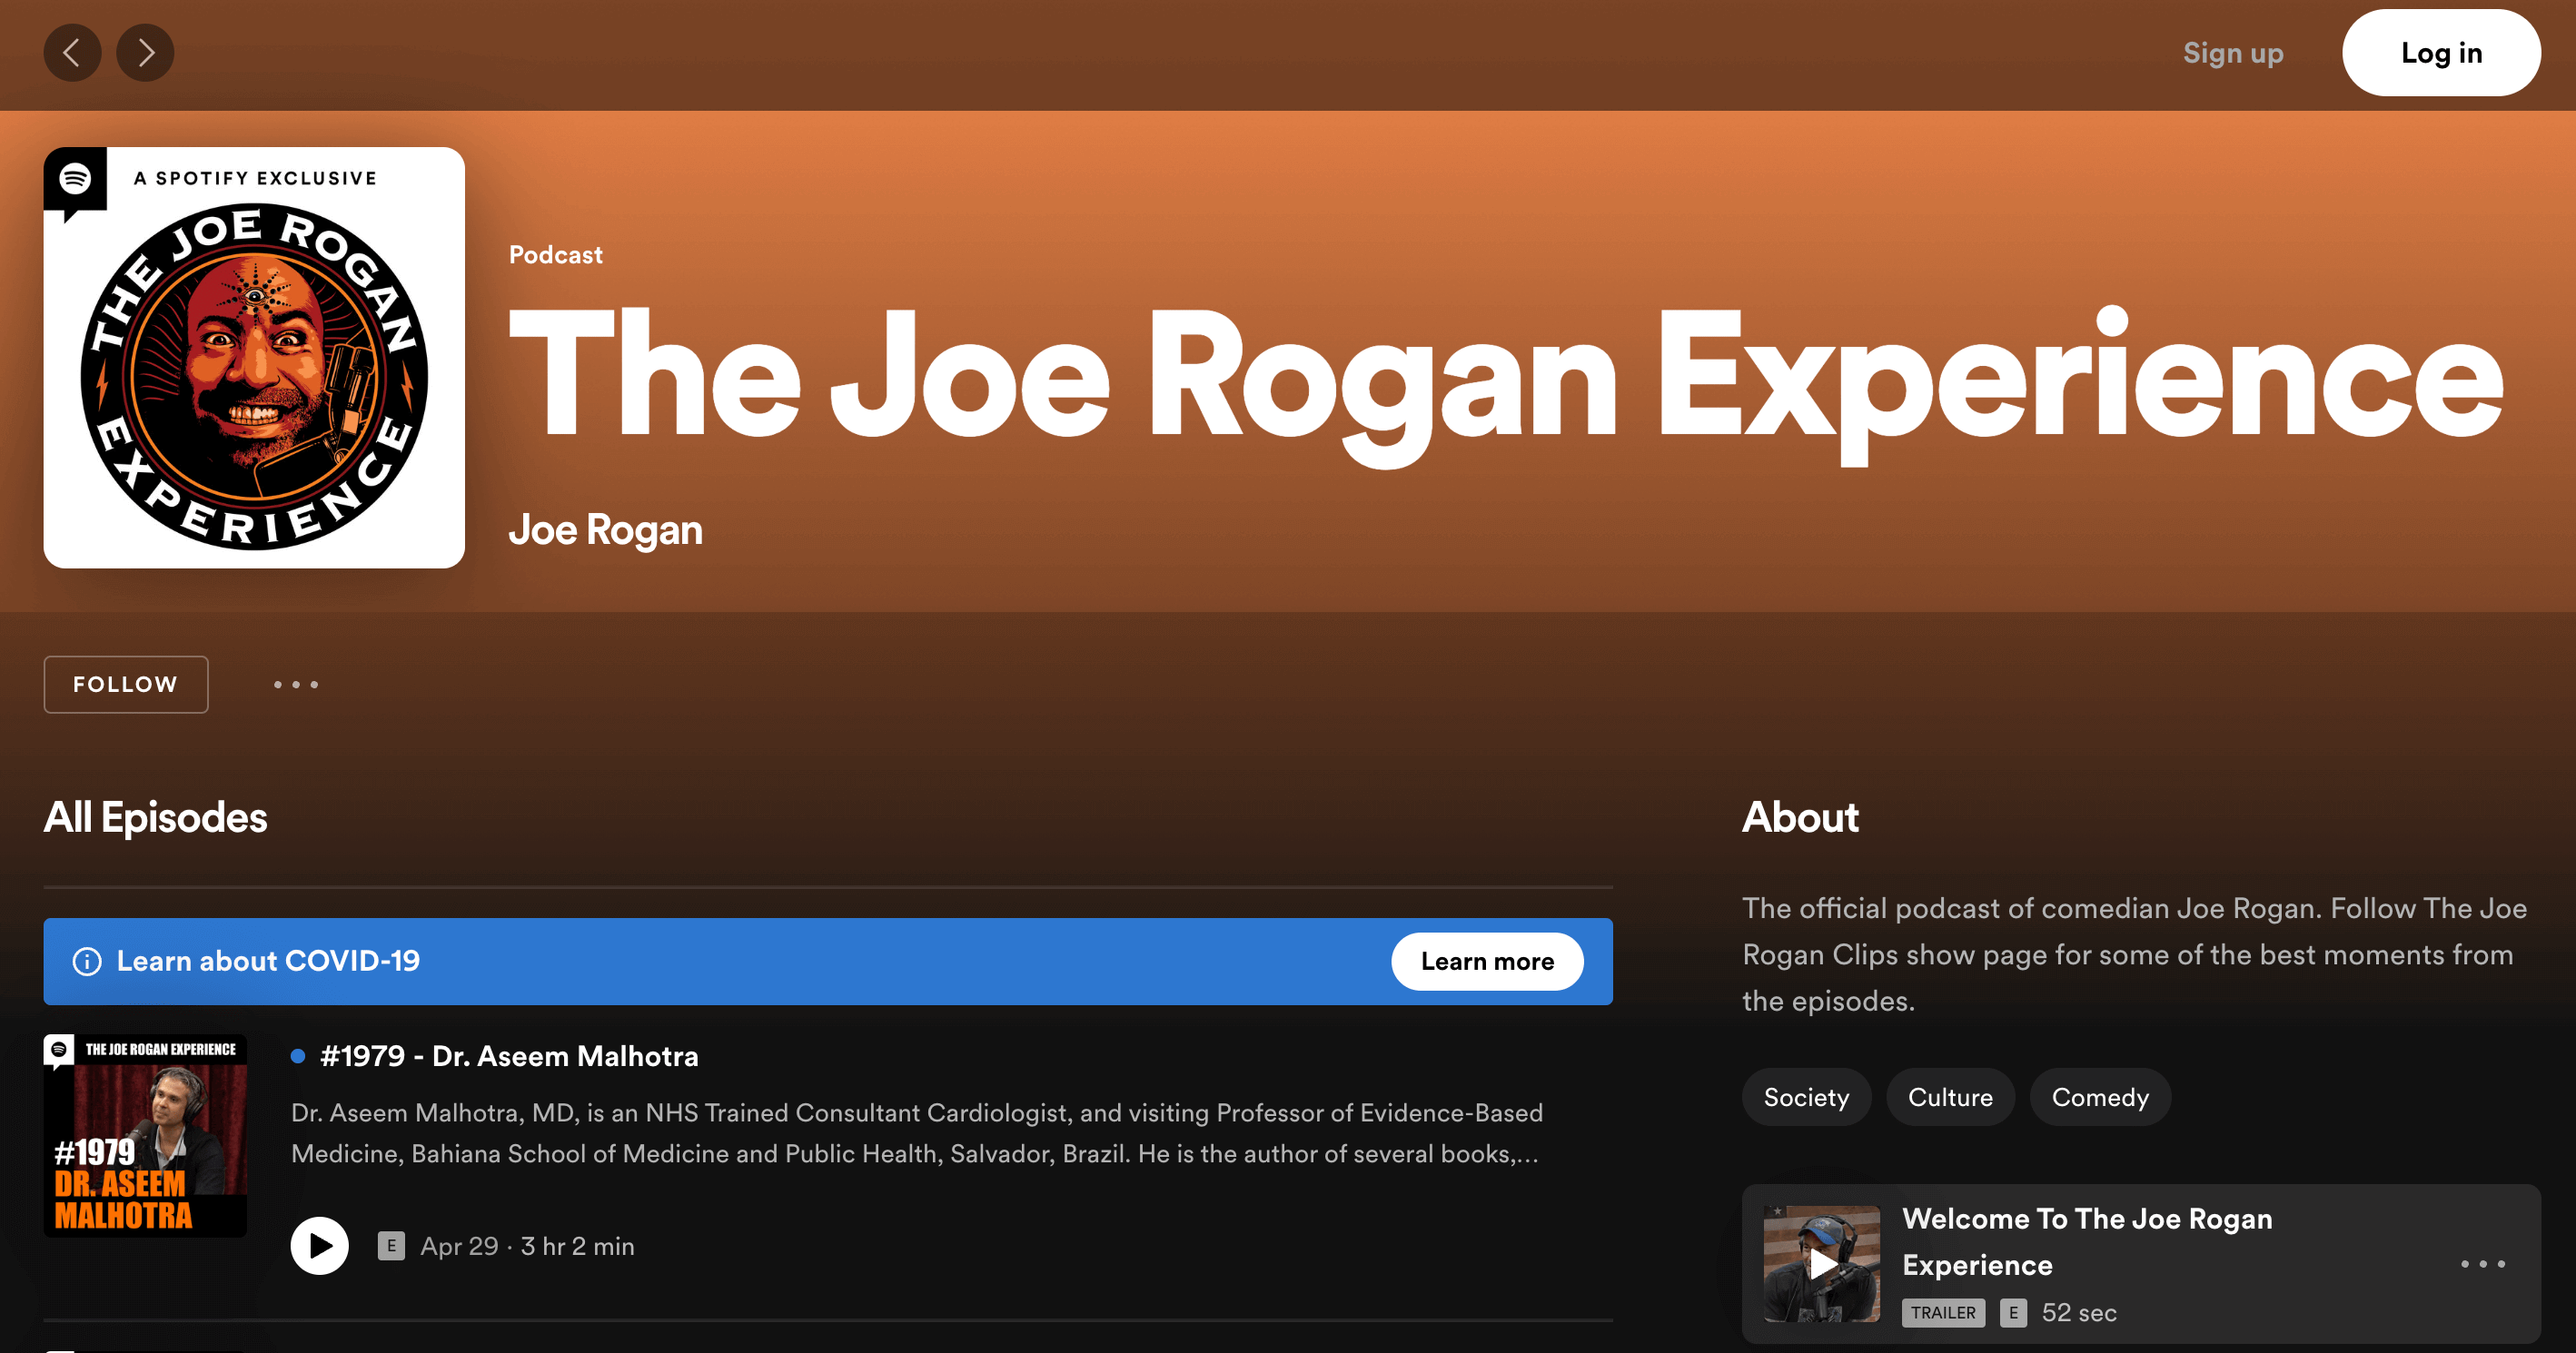 JRE Content Marketing Examples